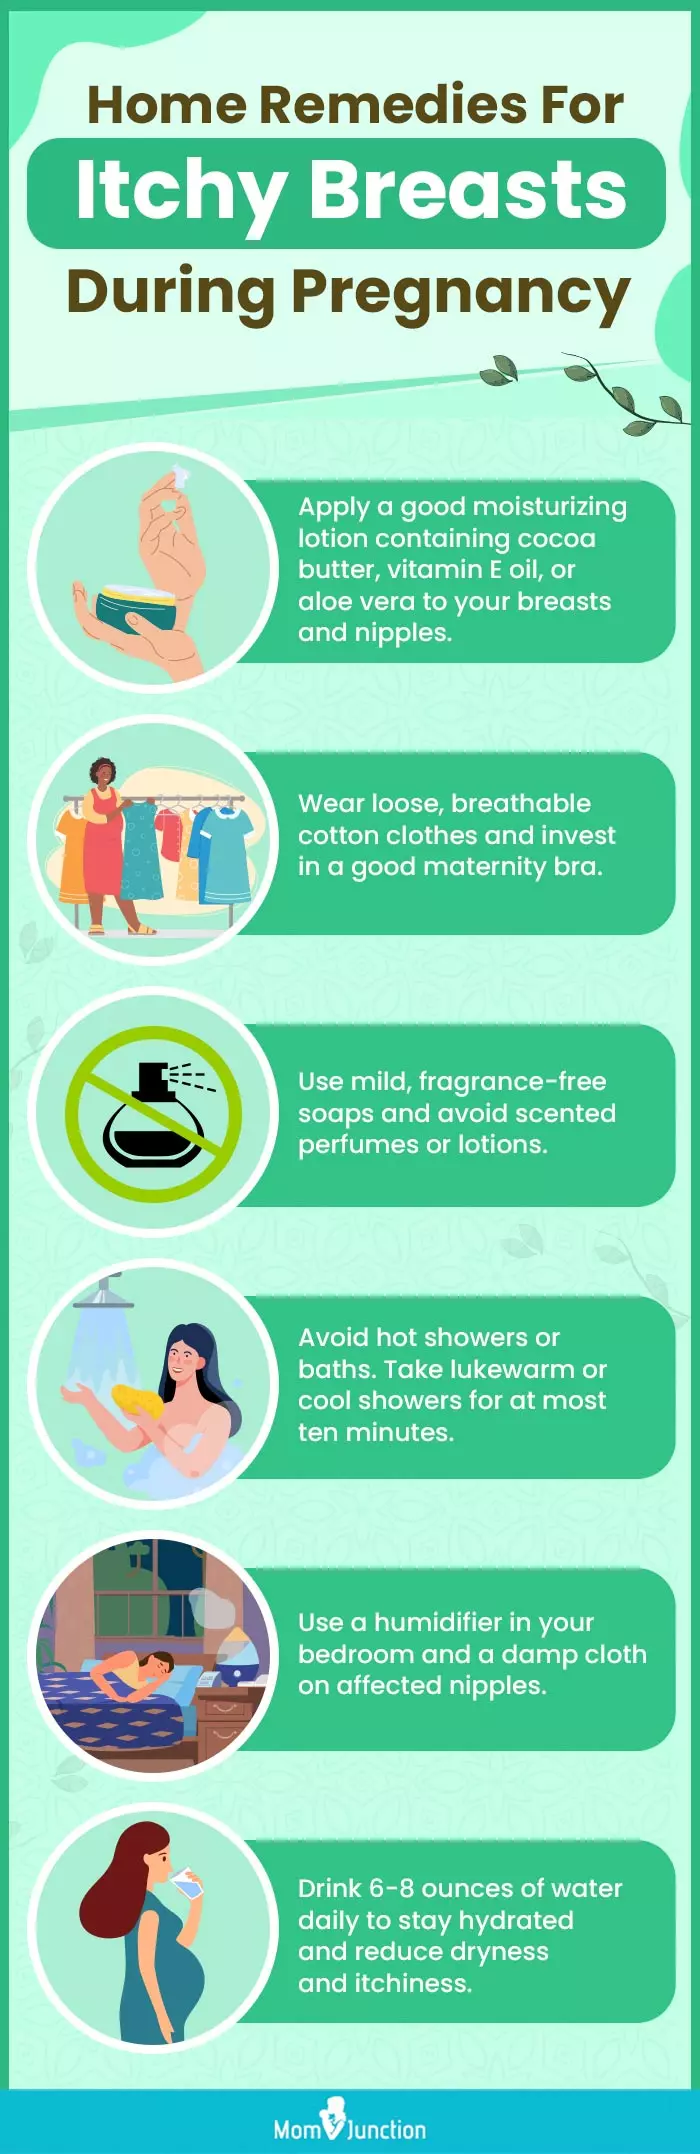 home remedies for itchy breasts during pregnancy (infographic)